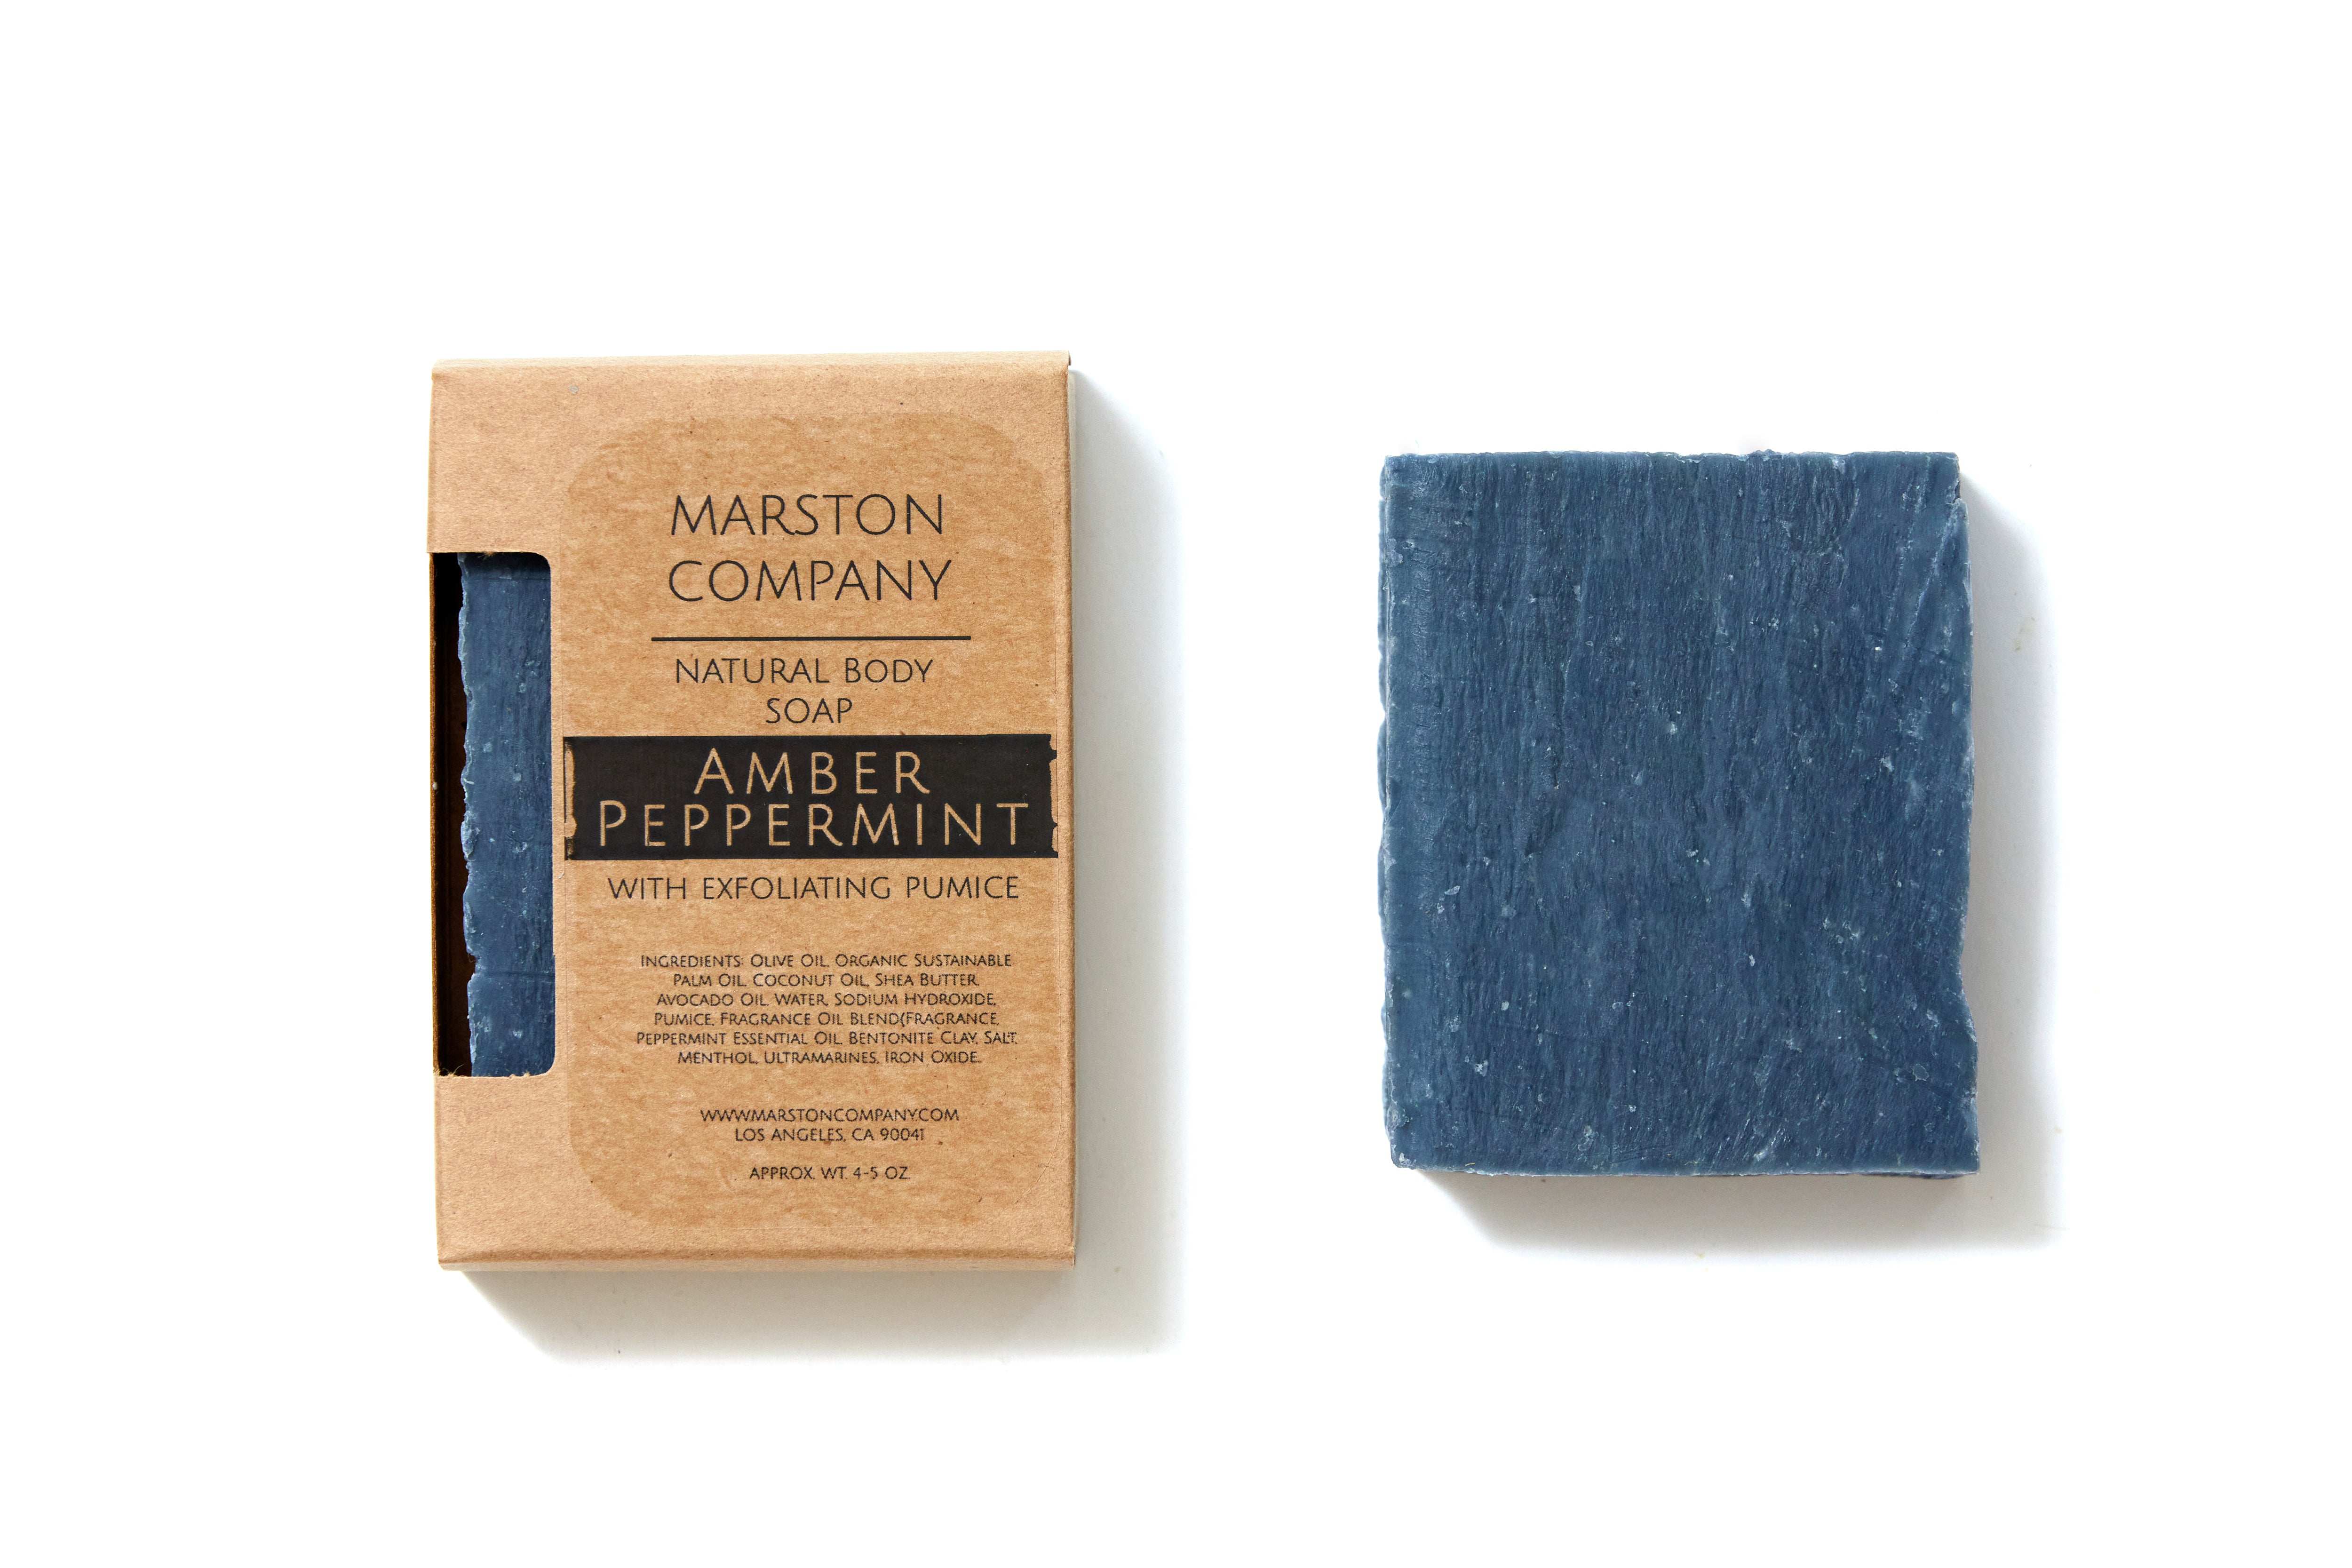 Amber Peppermint Exfoliating Pumice Soap – Marston Company